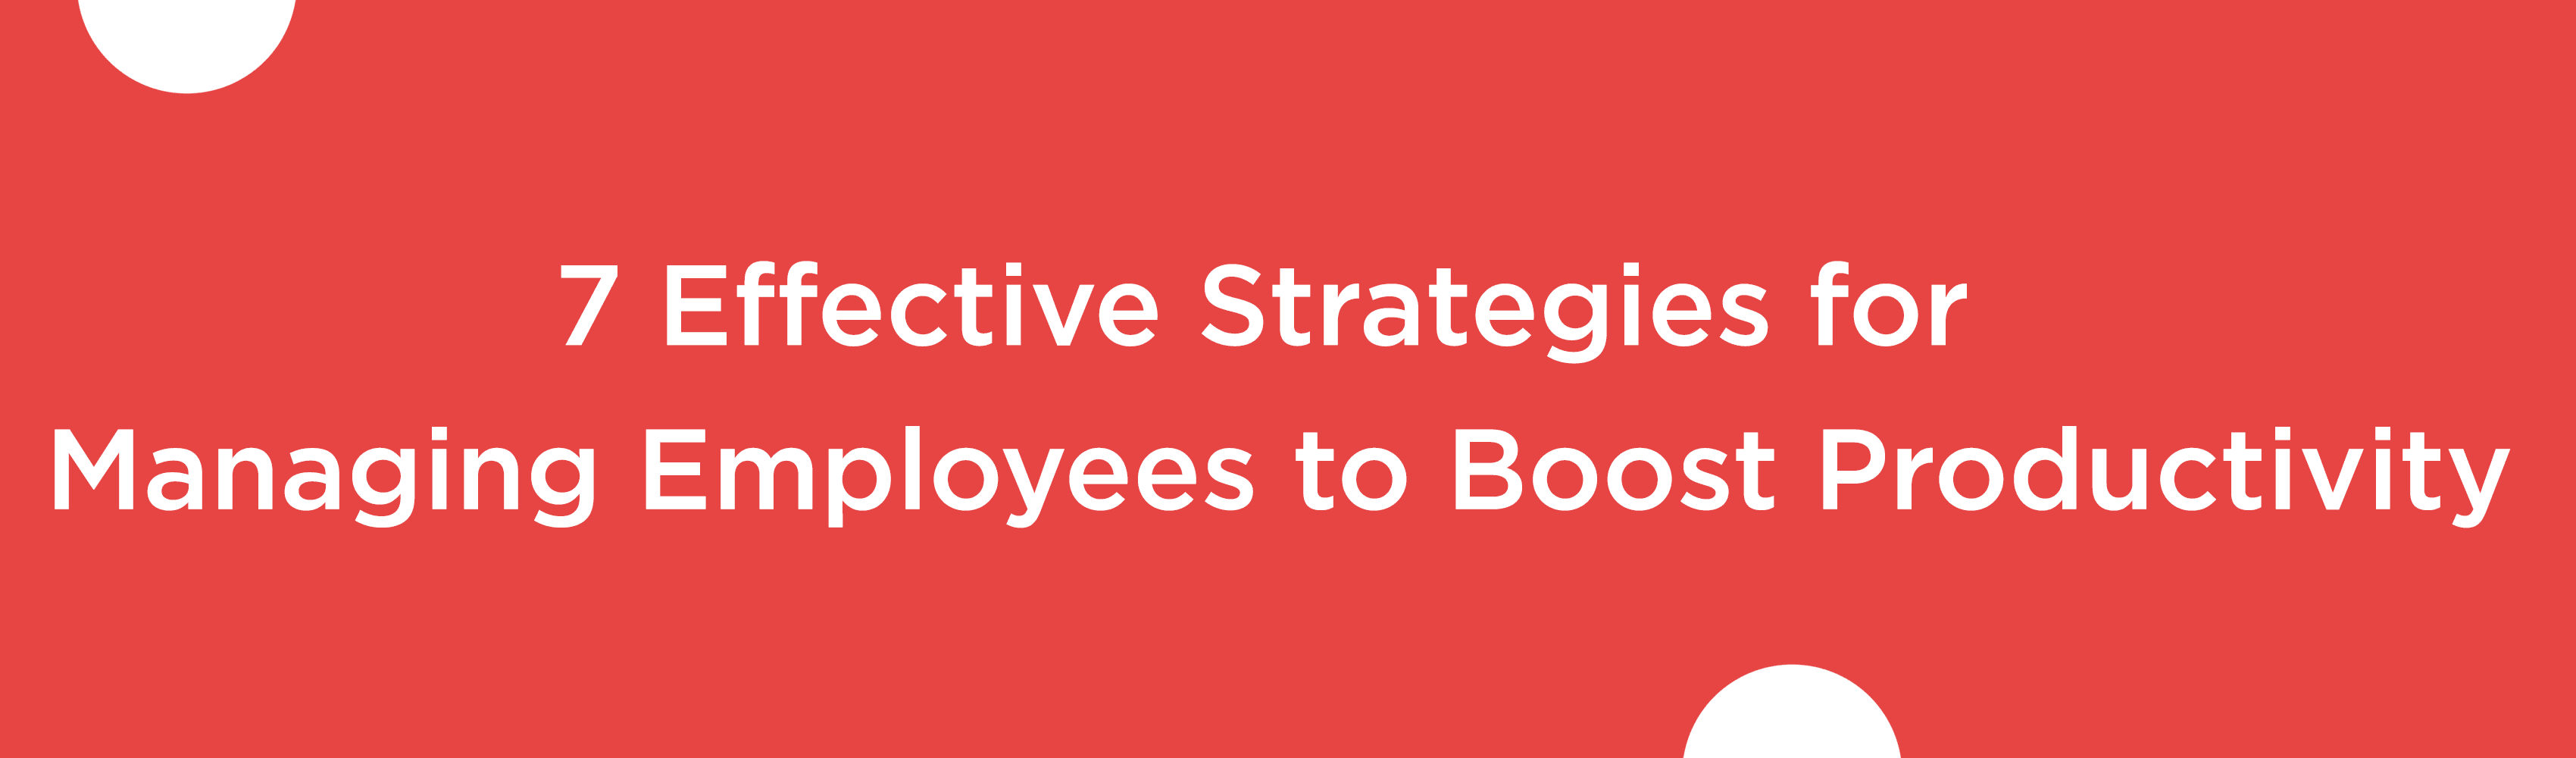 7 Effective Strategies for Managing Employees To Boost Productivity